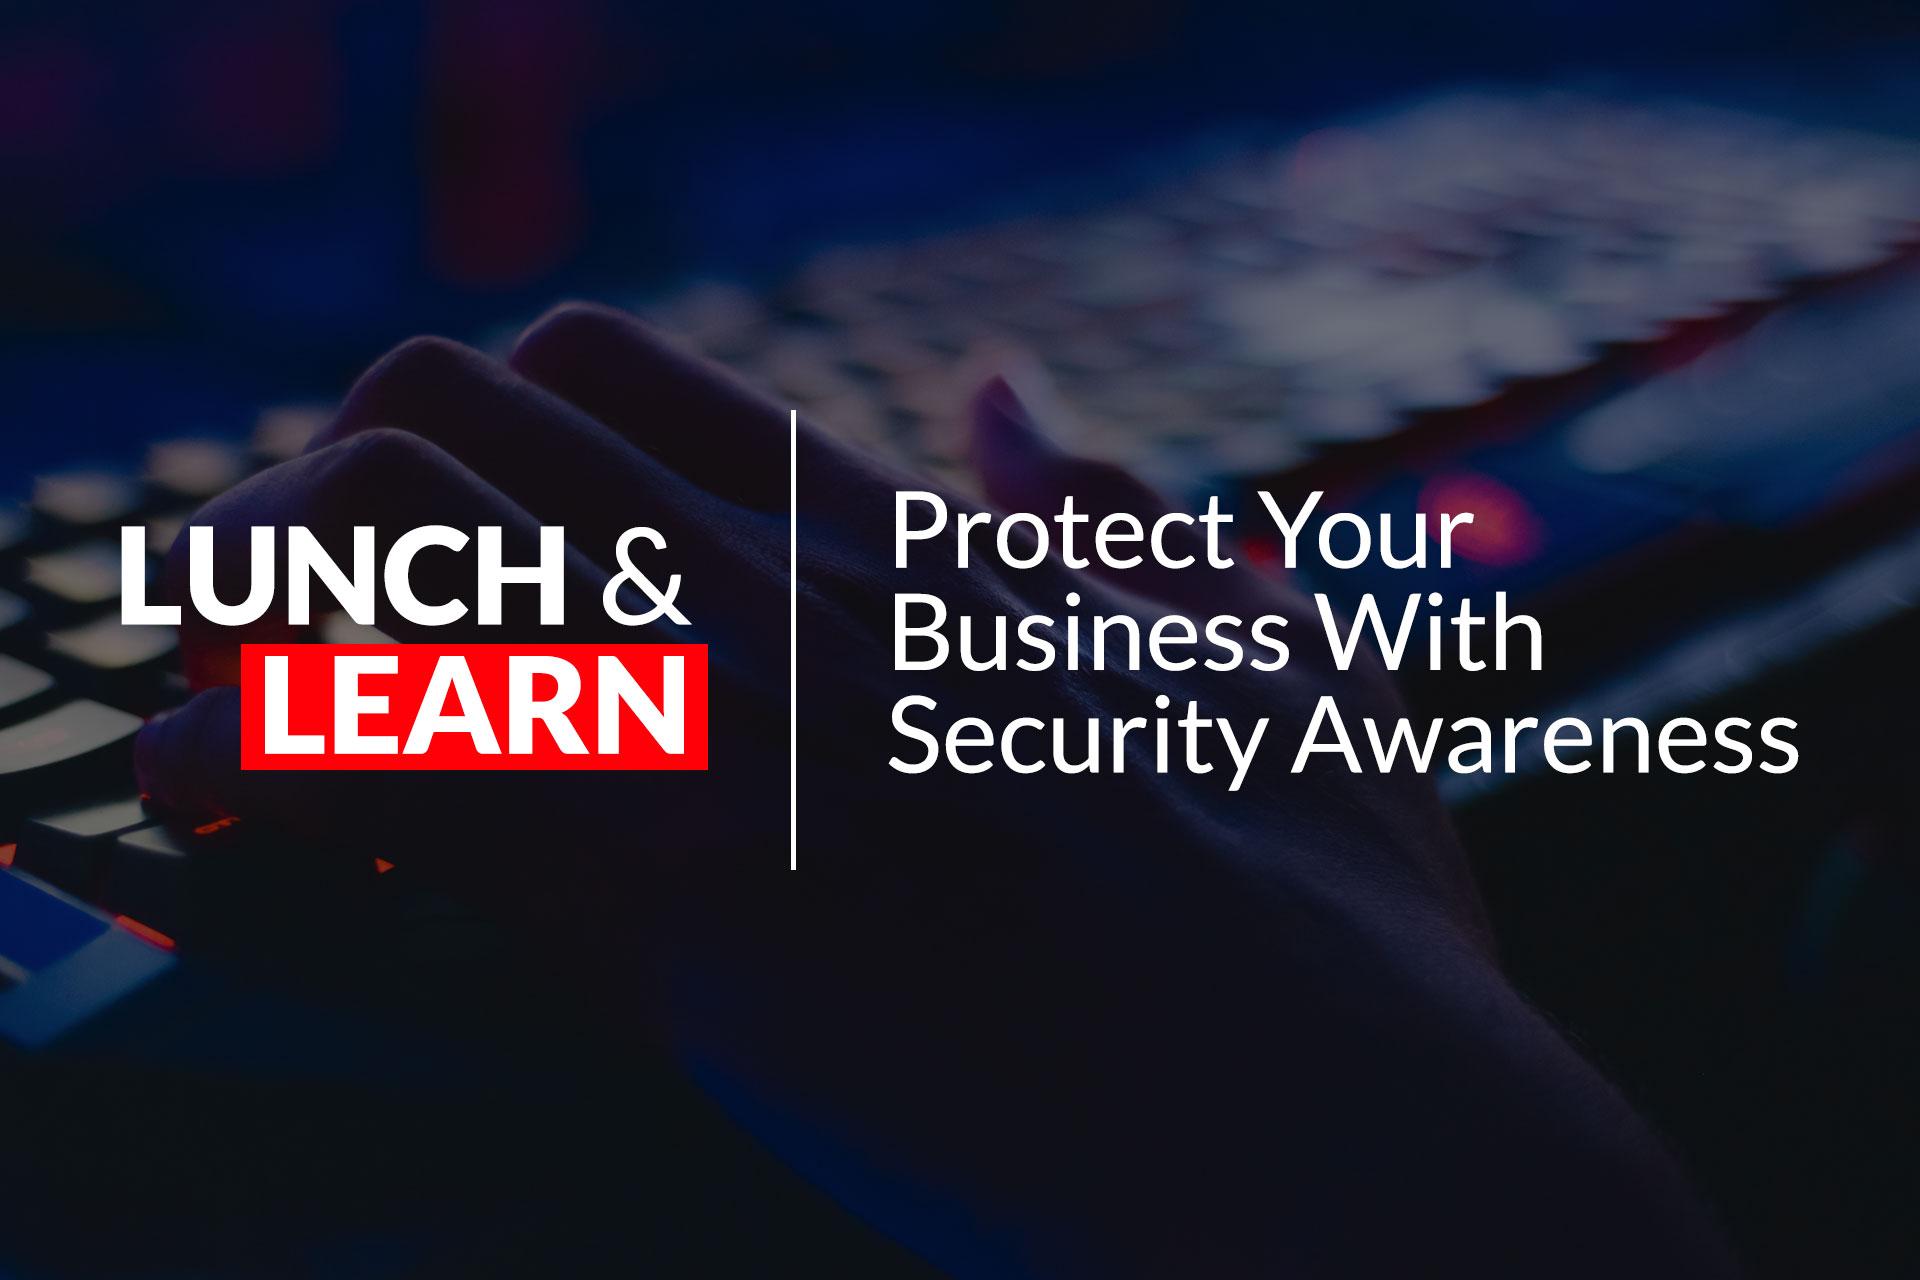 Lunch & Learn: Protect Your Business With Security Awareness